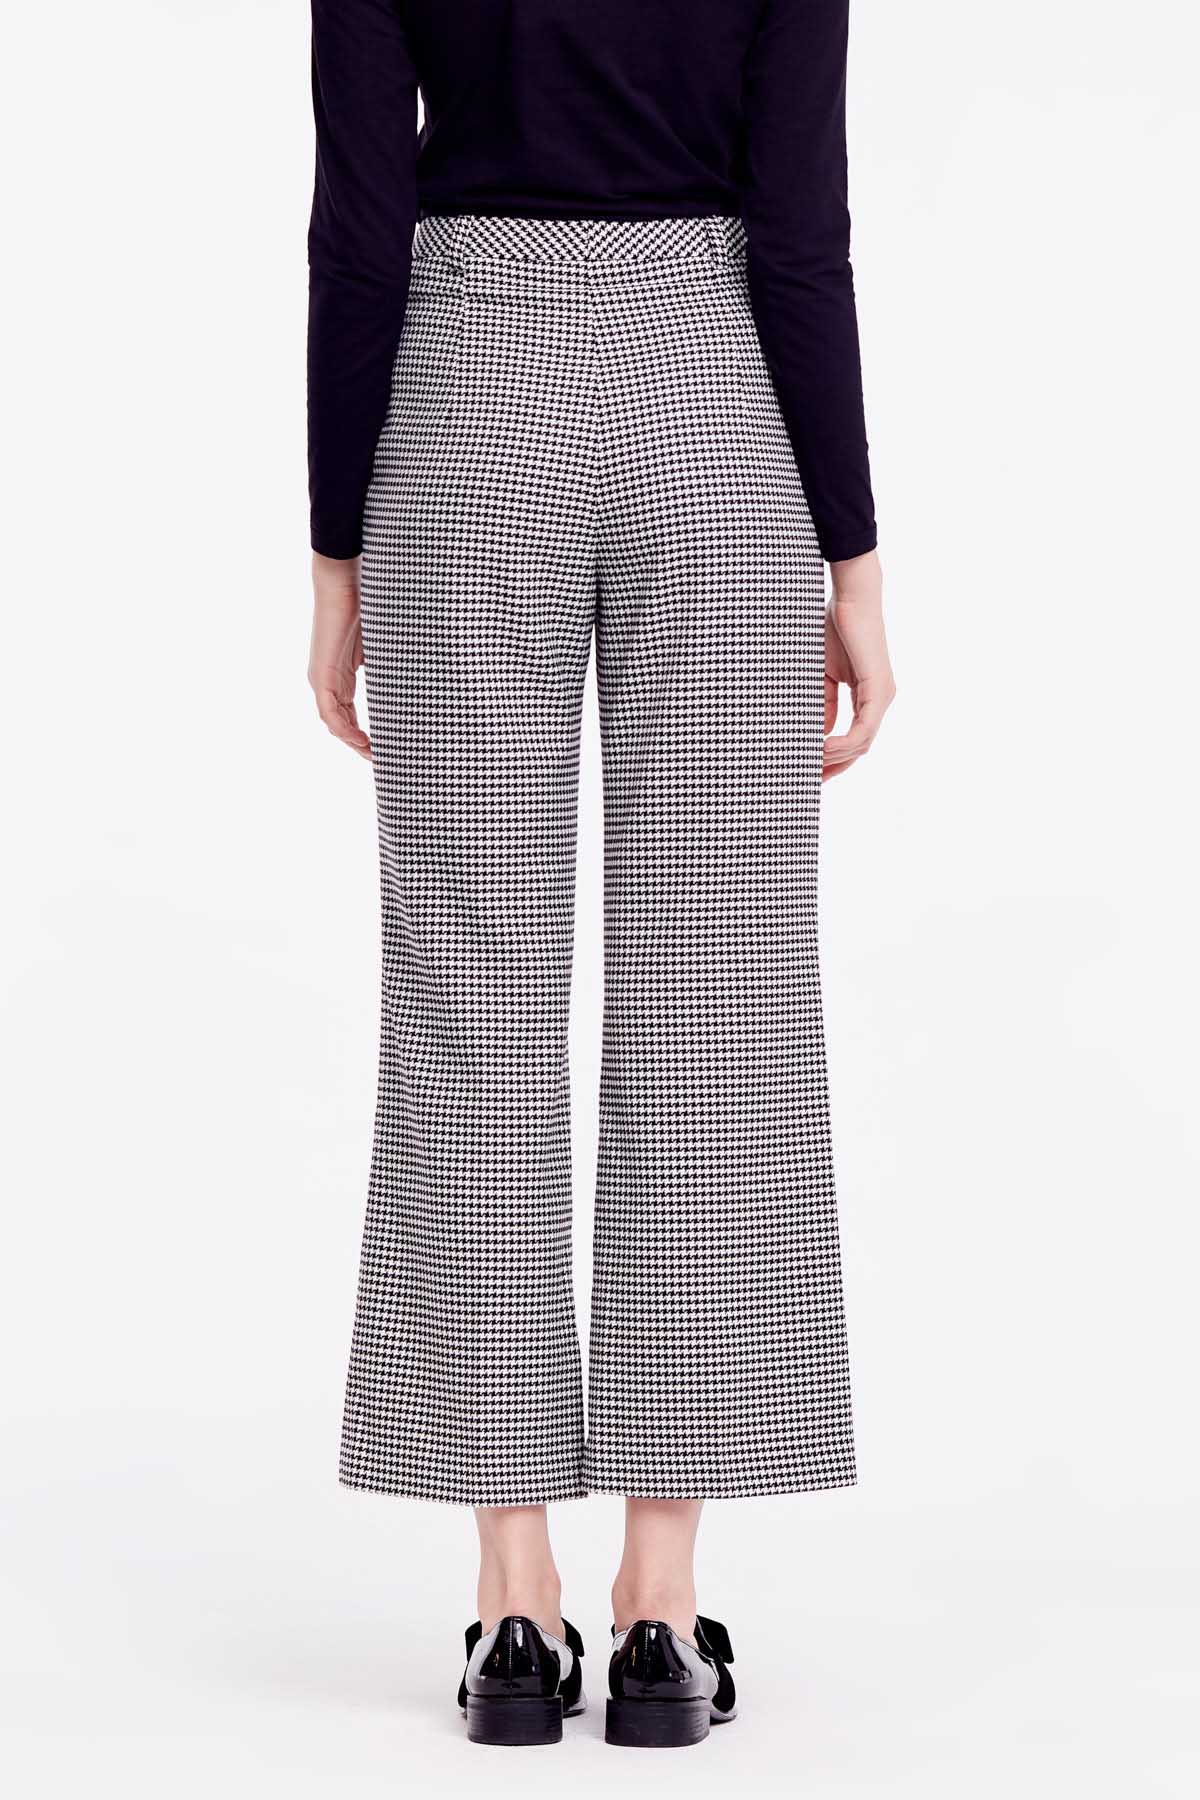 Cropped trousers with black-and-white houndstooth print, photo 4